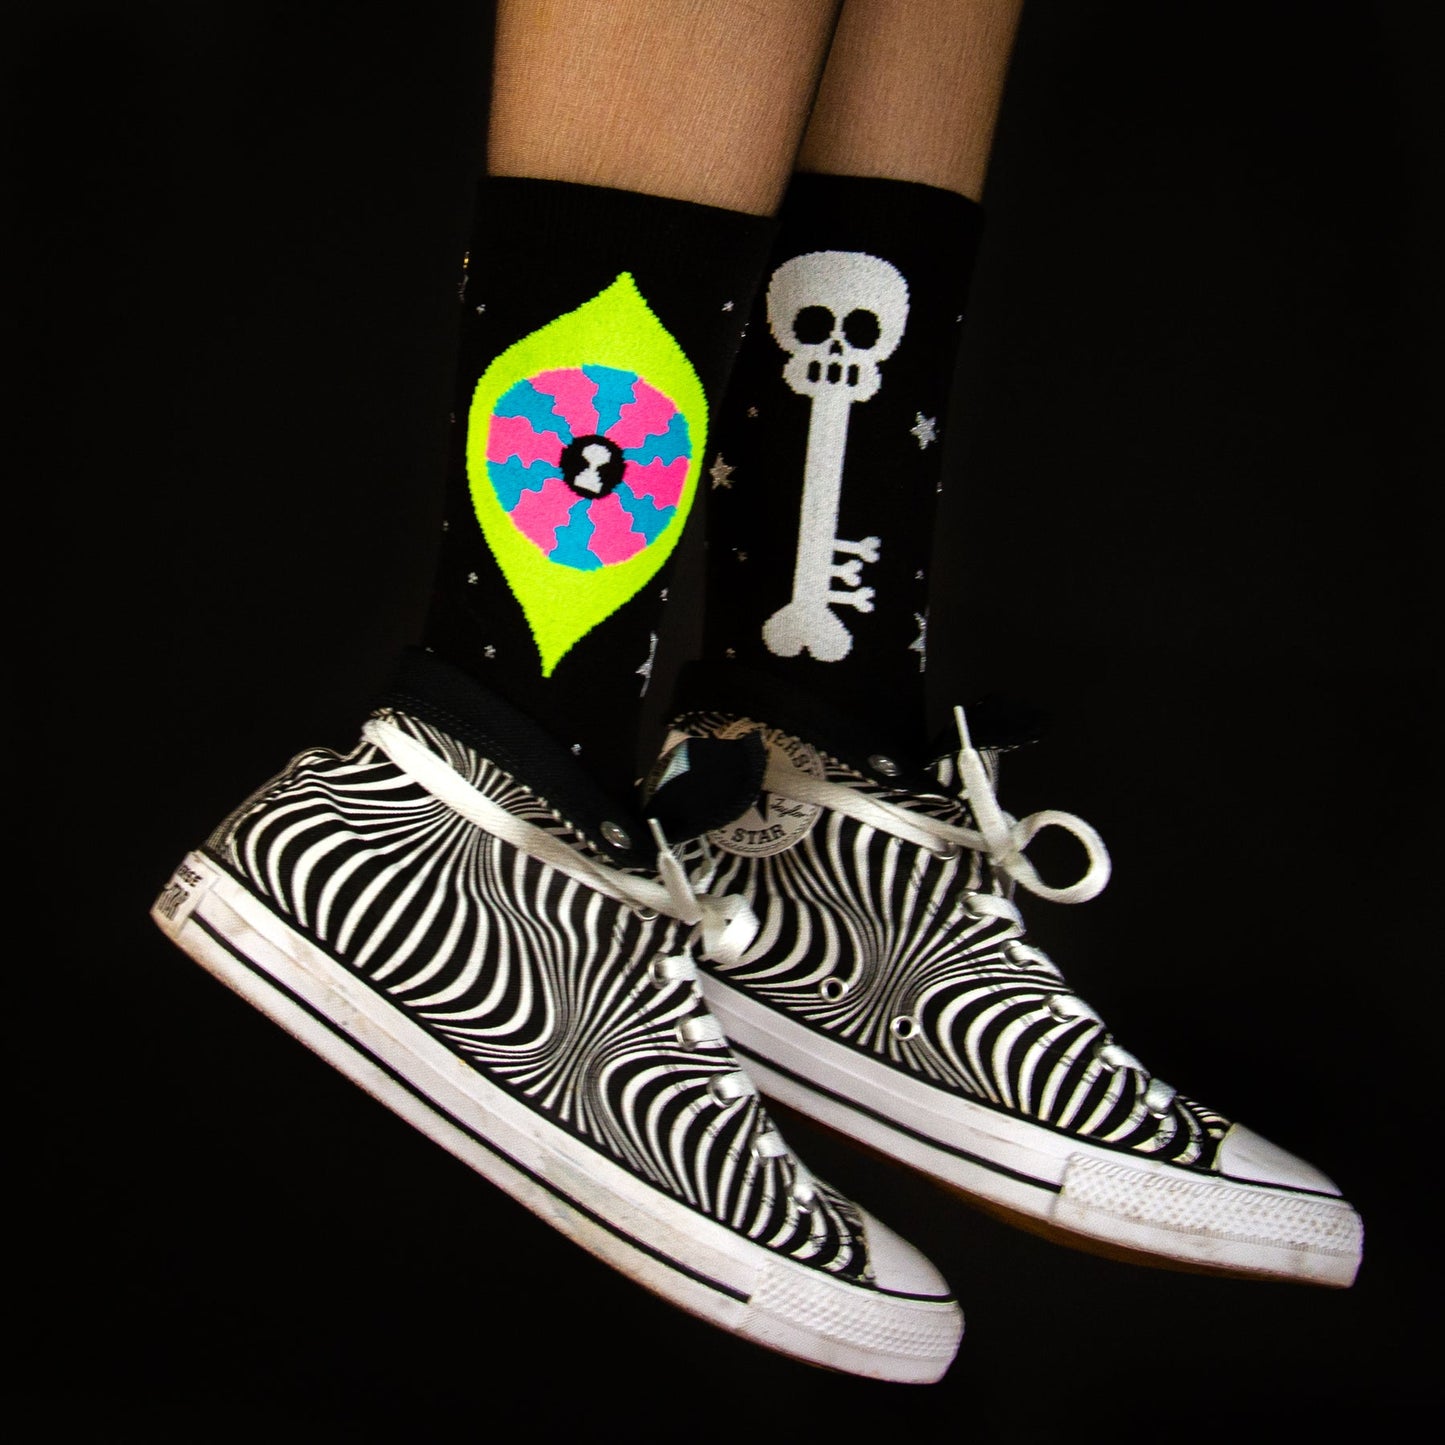 Gumball Poodle Oliver's Eye socks - black with colored and silver details 